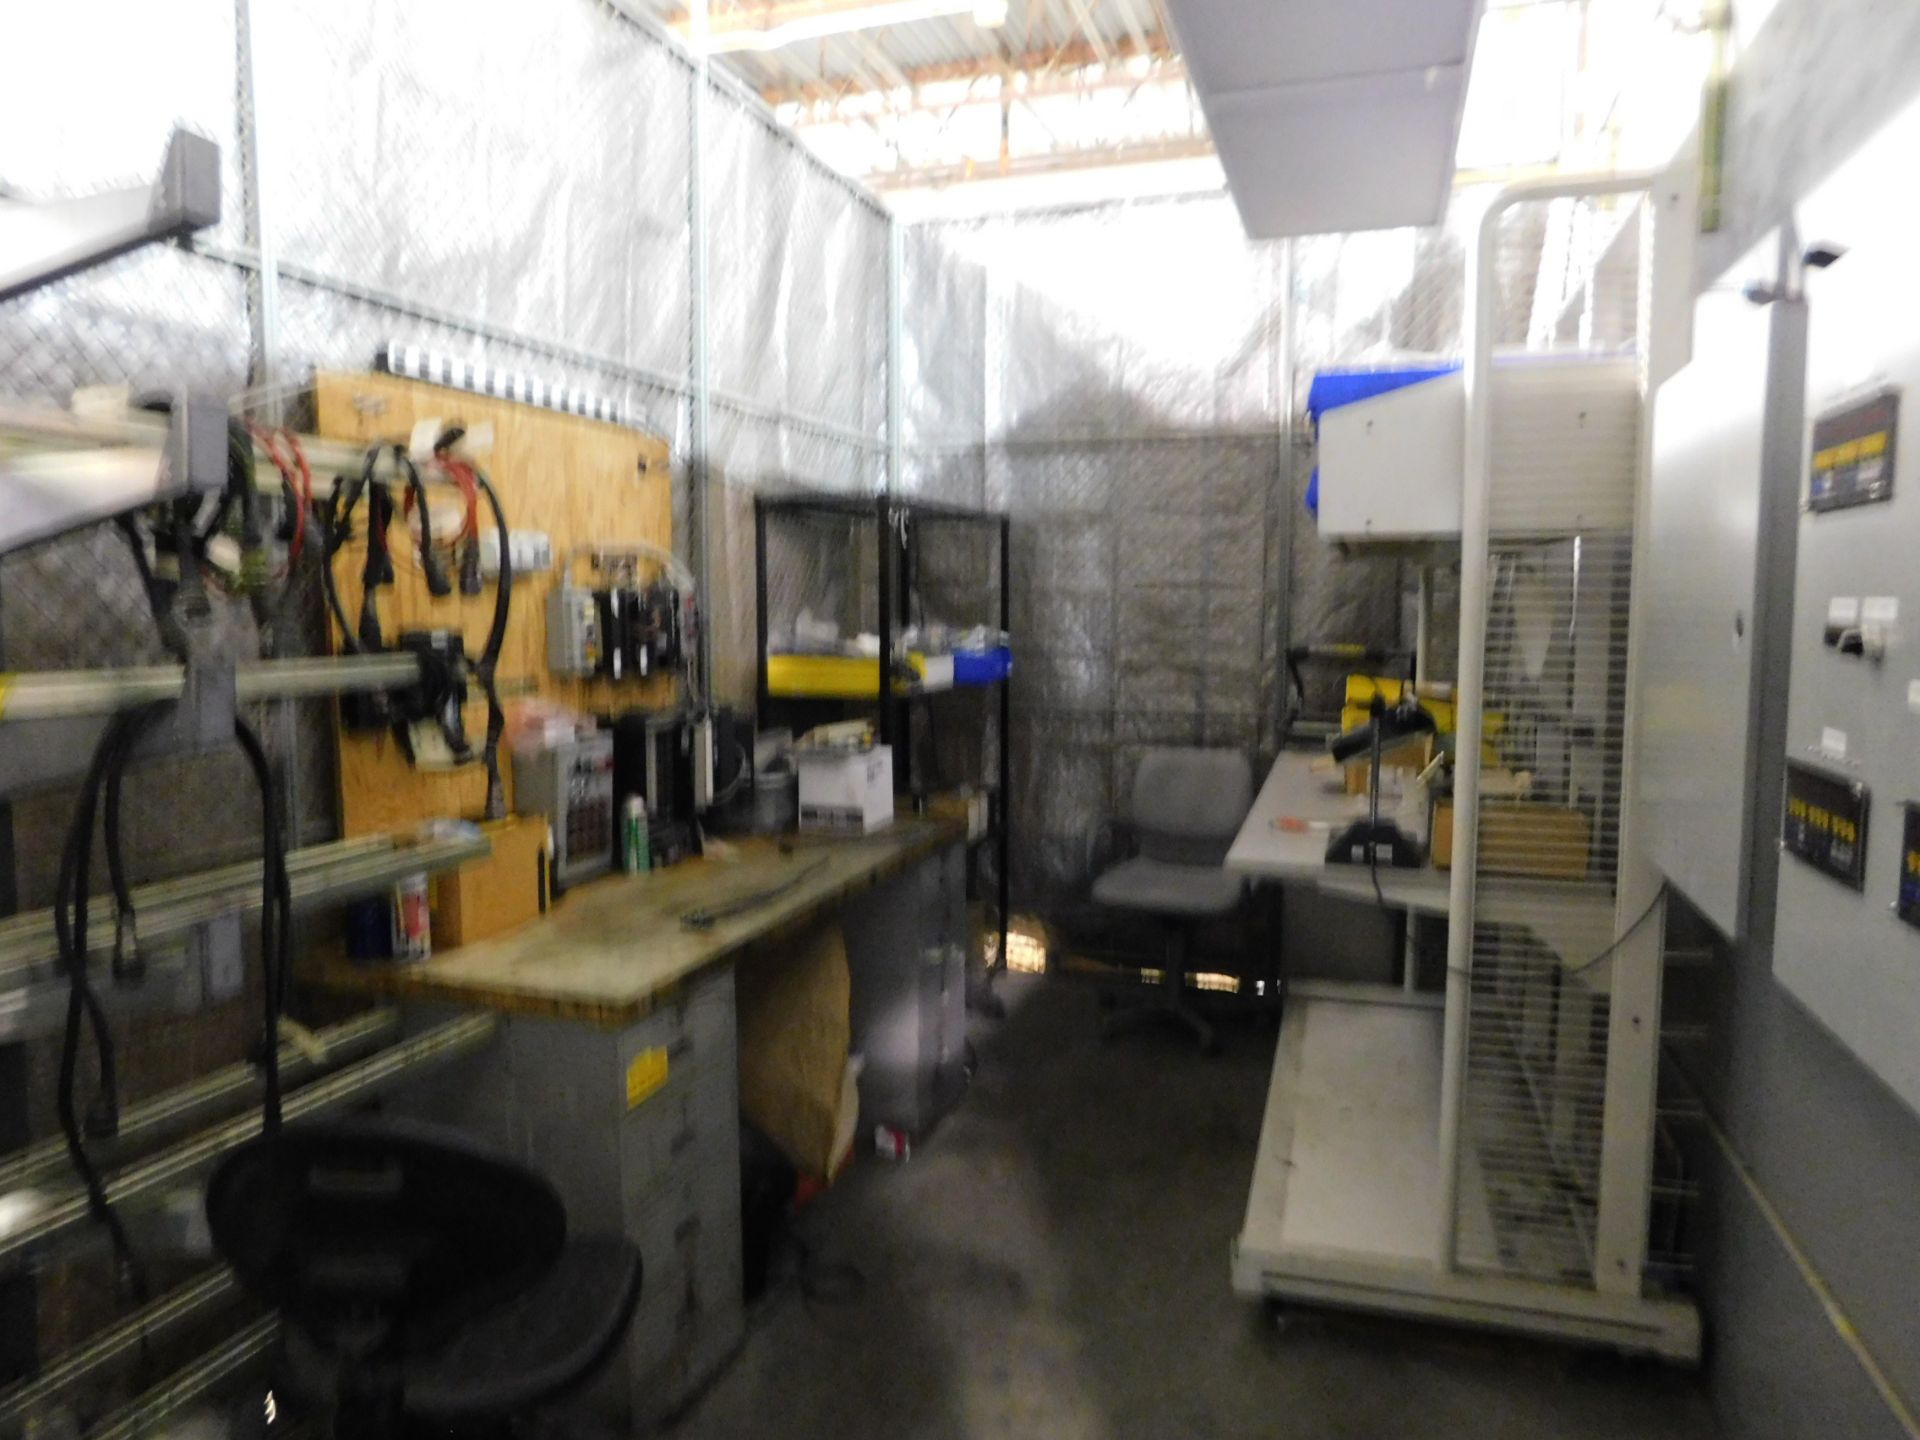 Content of cage area with electrical shafts, fuses, test desk, cantilever racking - Image 9 of 13